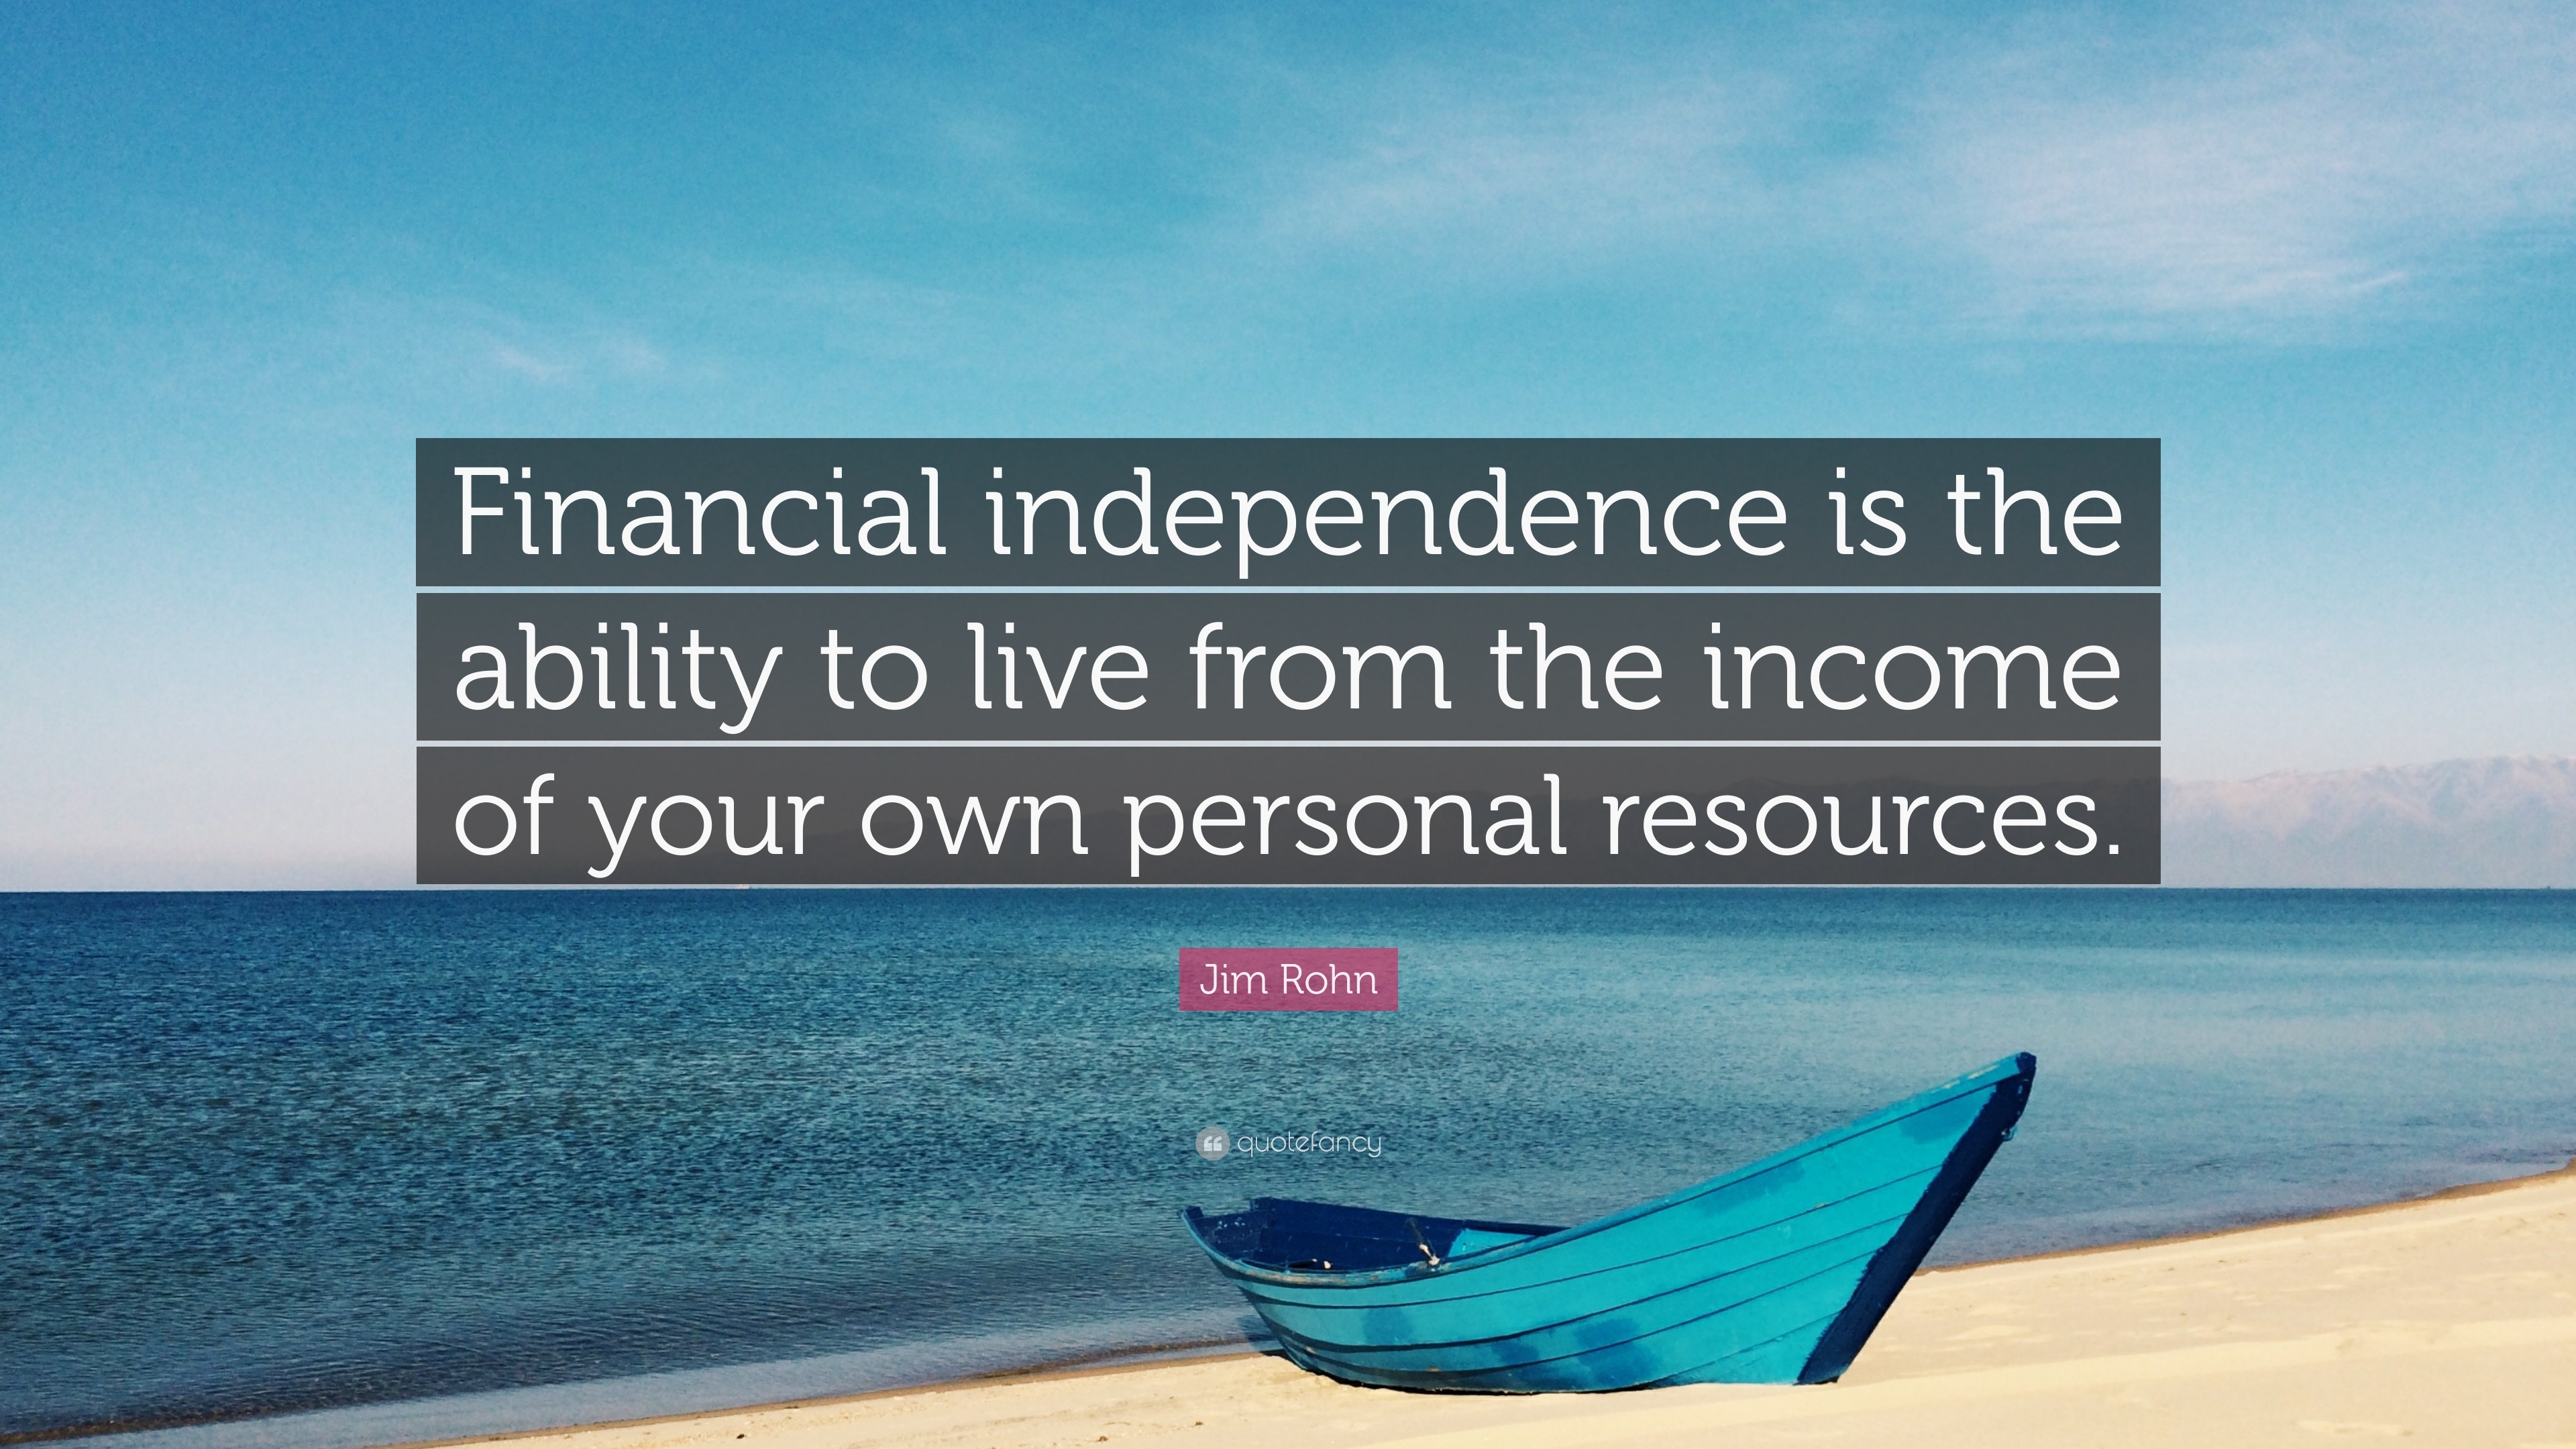 Jim Rohn Quote: “Financial independence is the ability to live from the